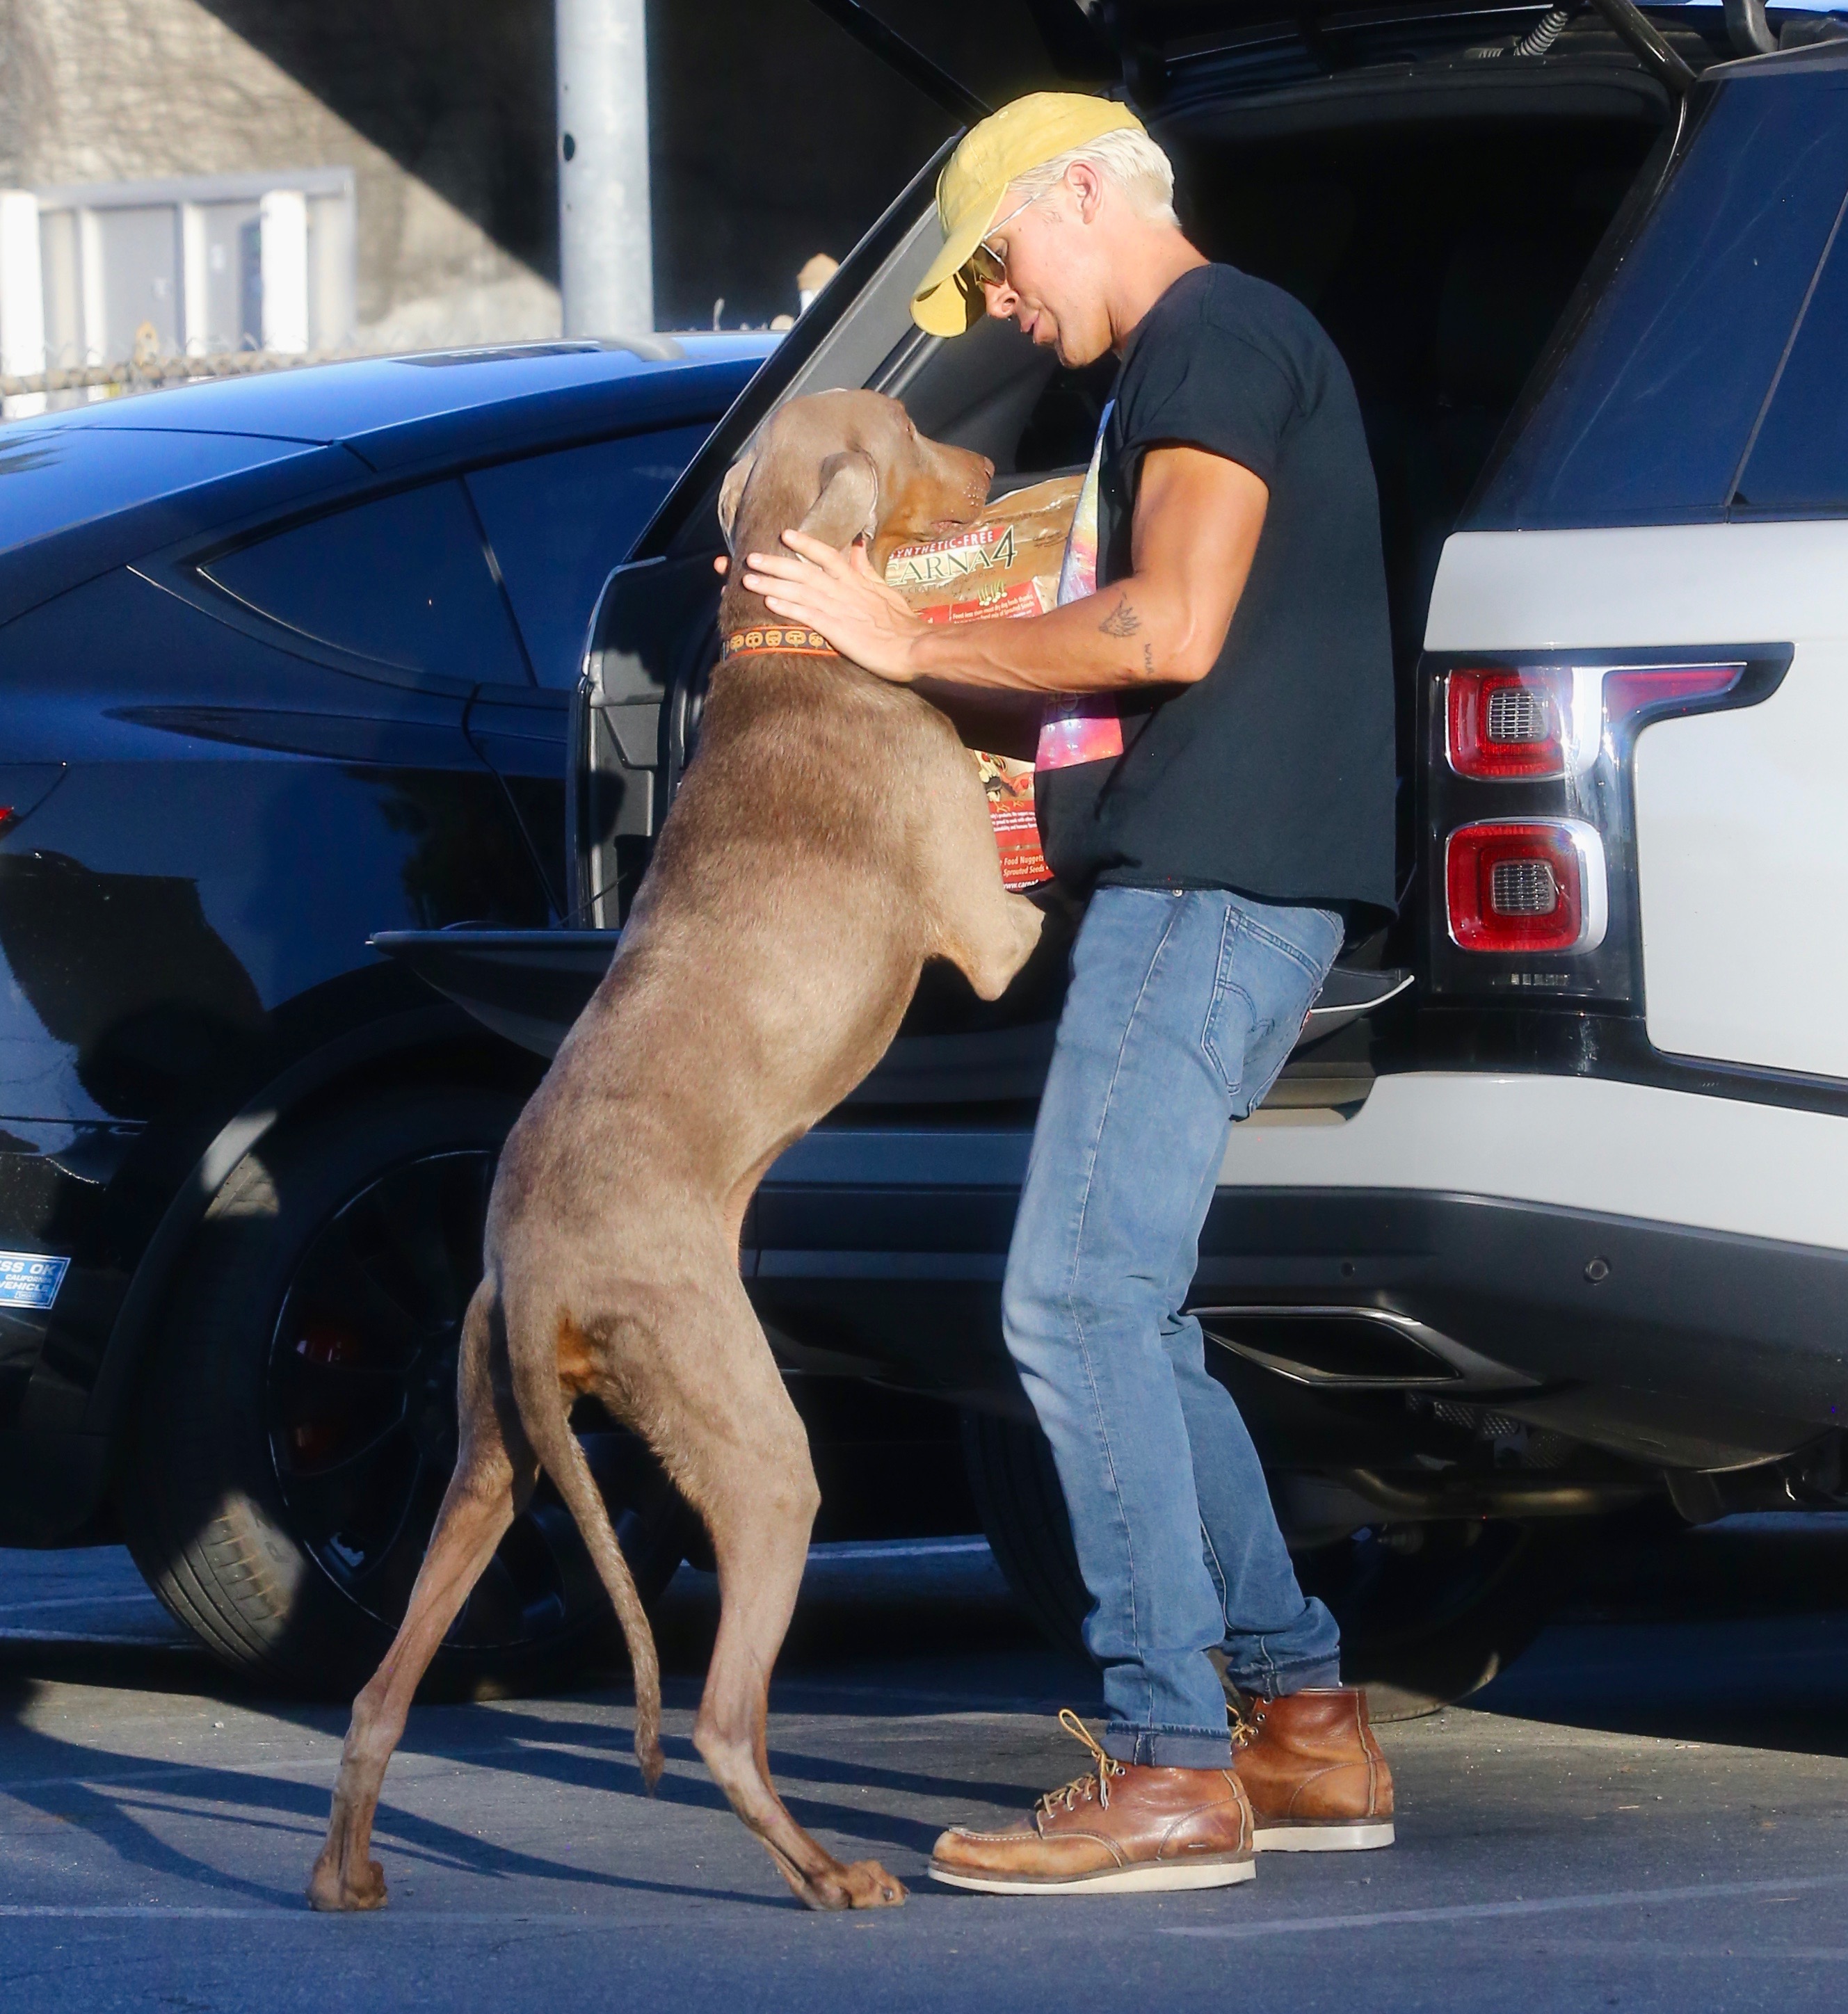 Ryan Gosling took his dog for a walk during a day off from filming the Barbie movie.  The actor was photographed when he got his pet Lucho out of his truck in the parking lot of a shopping center, where he went to buy food from a veterinarian